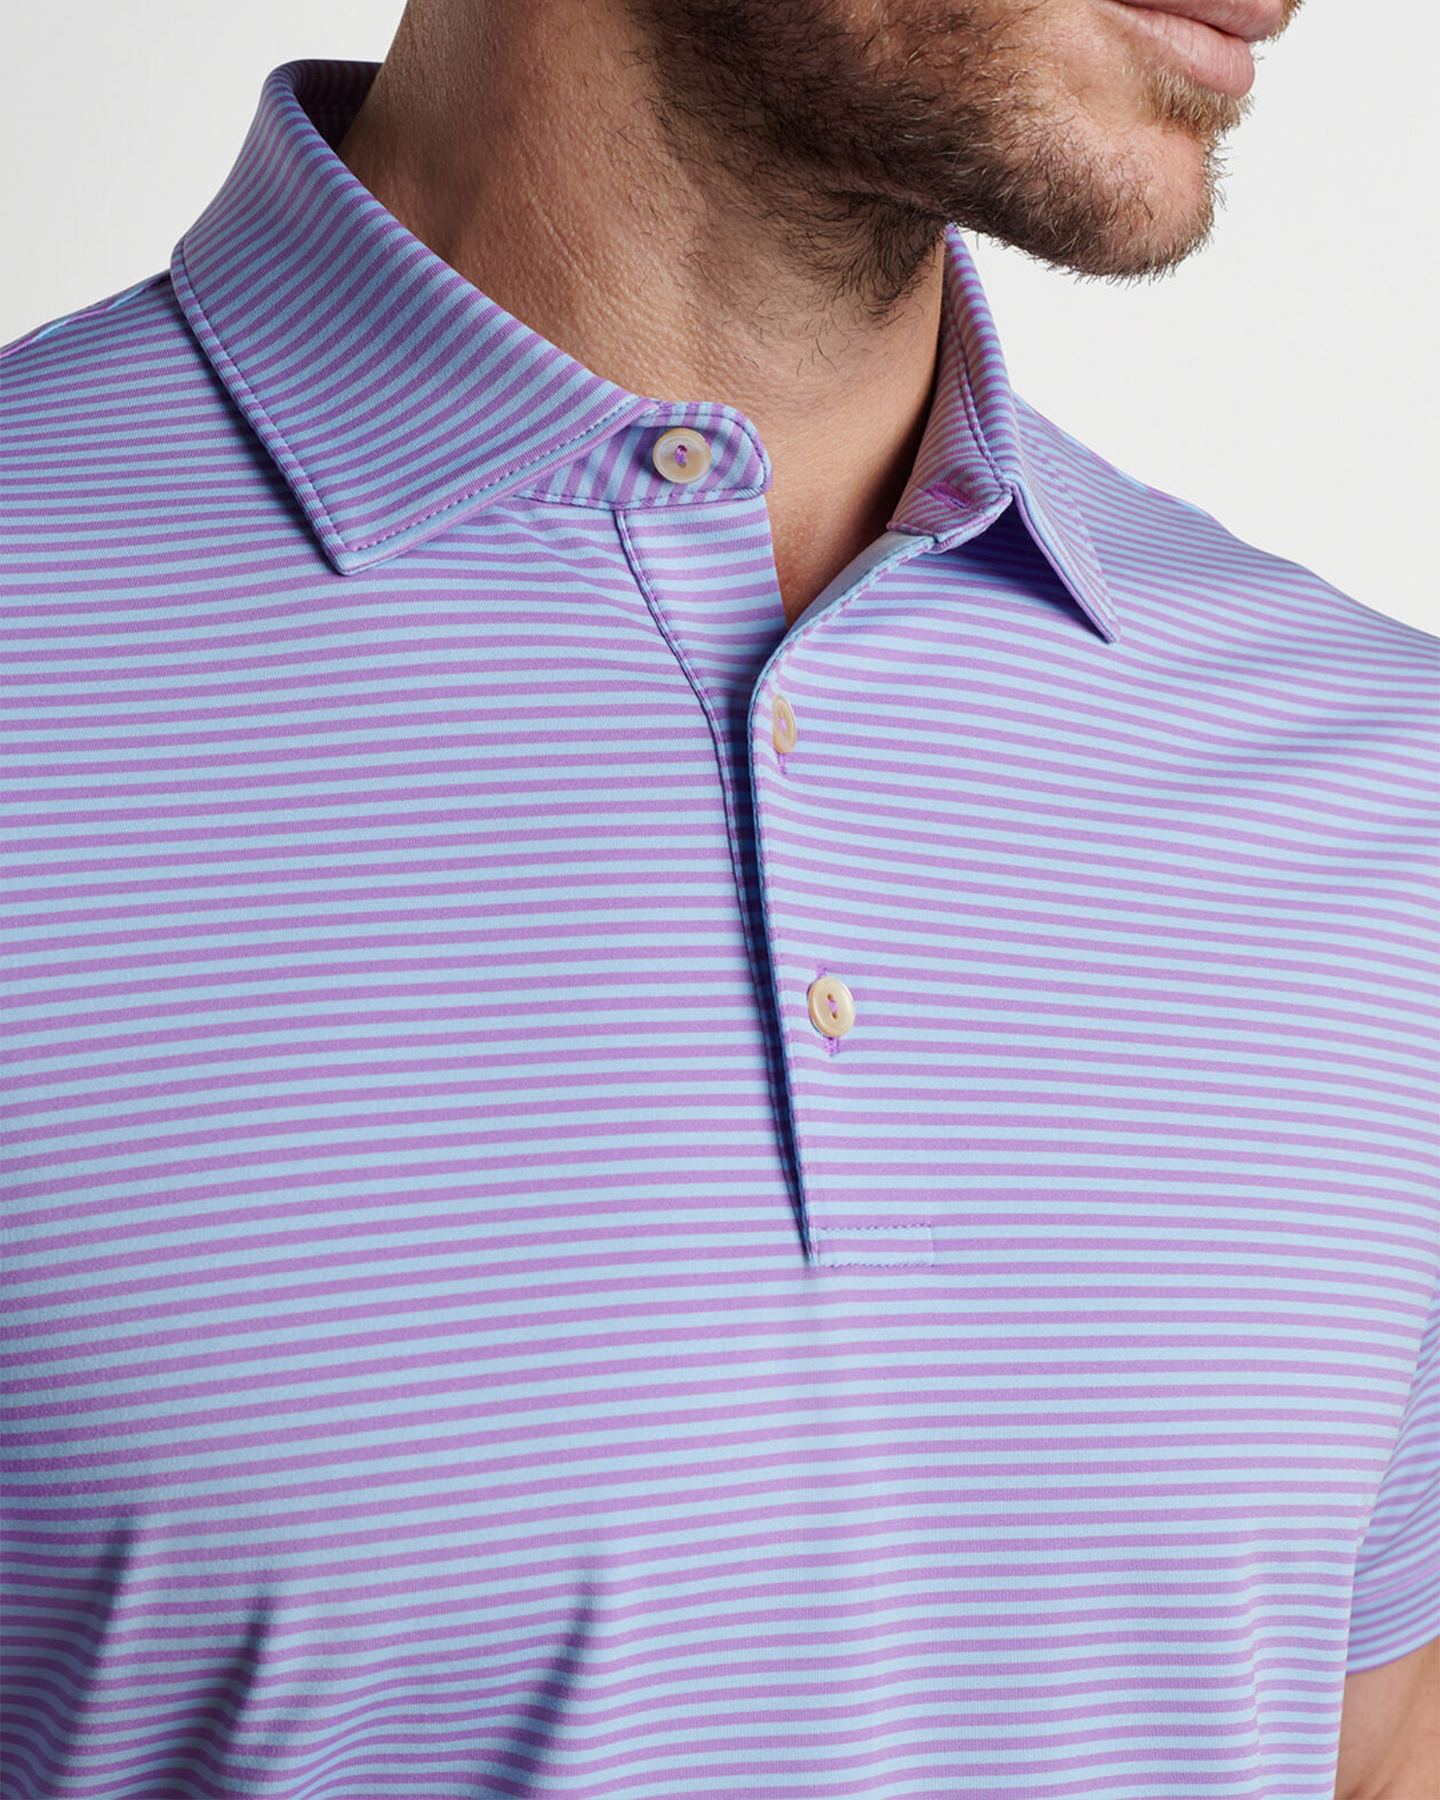 HALES PERFORMANCE JERSEY POLO - DRAGONFLY